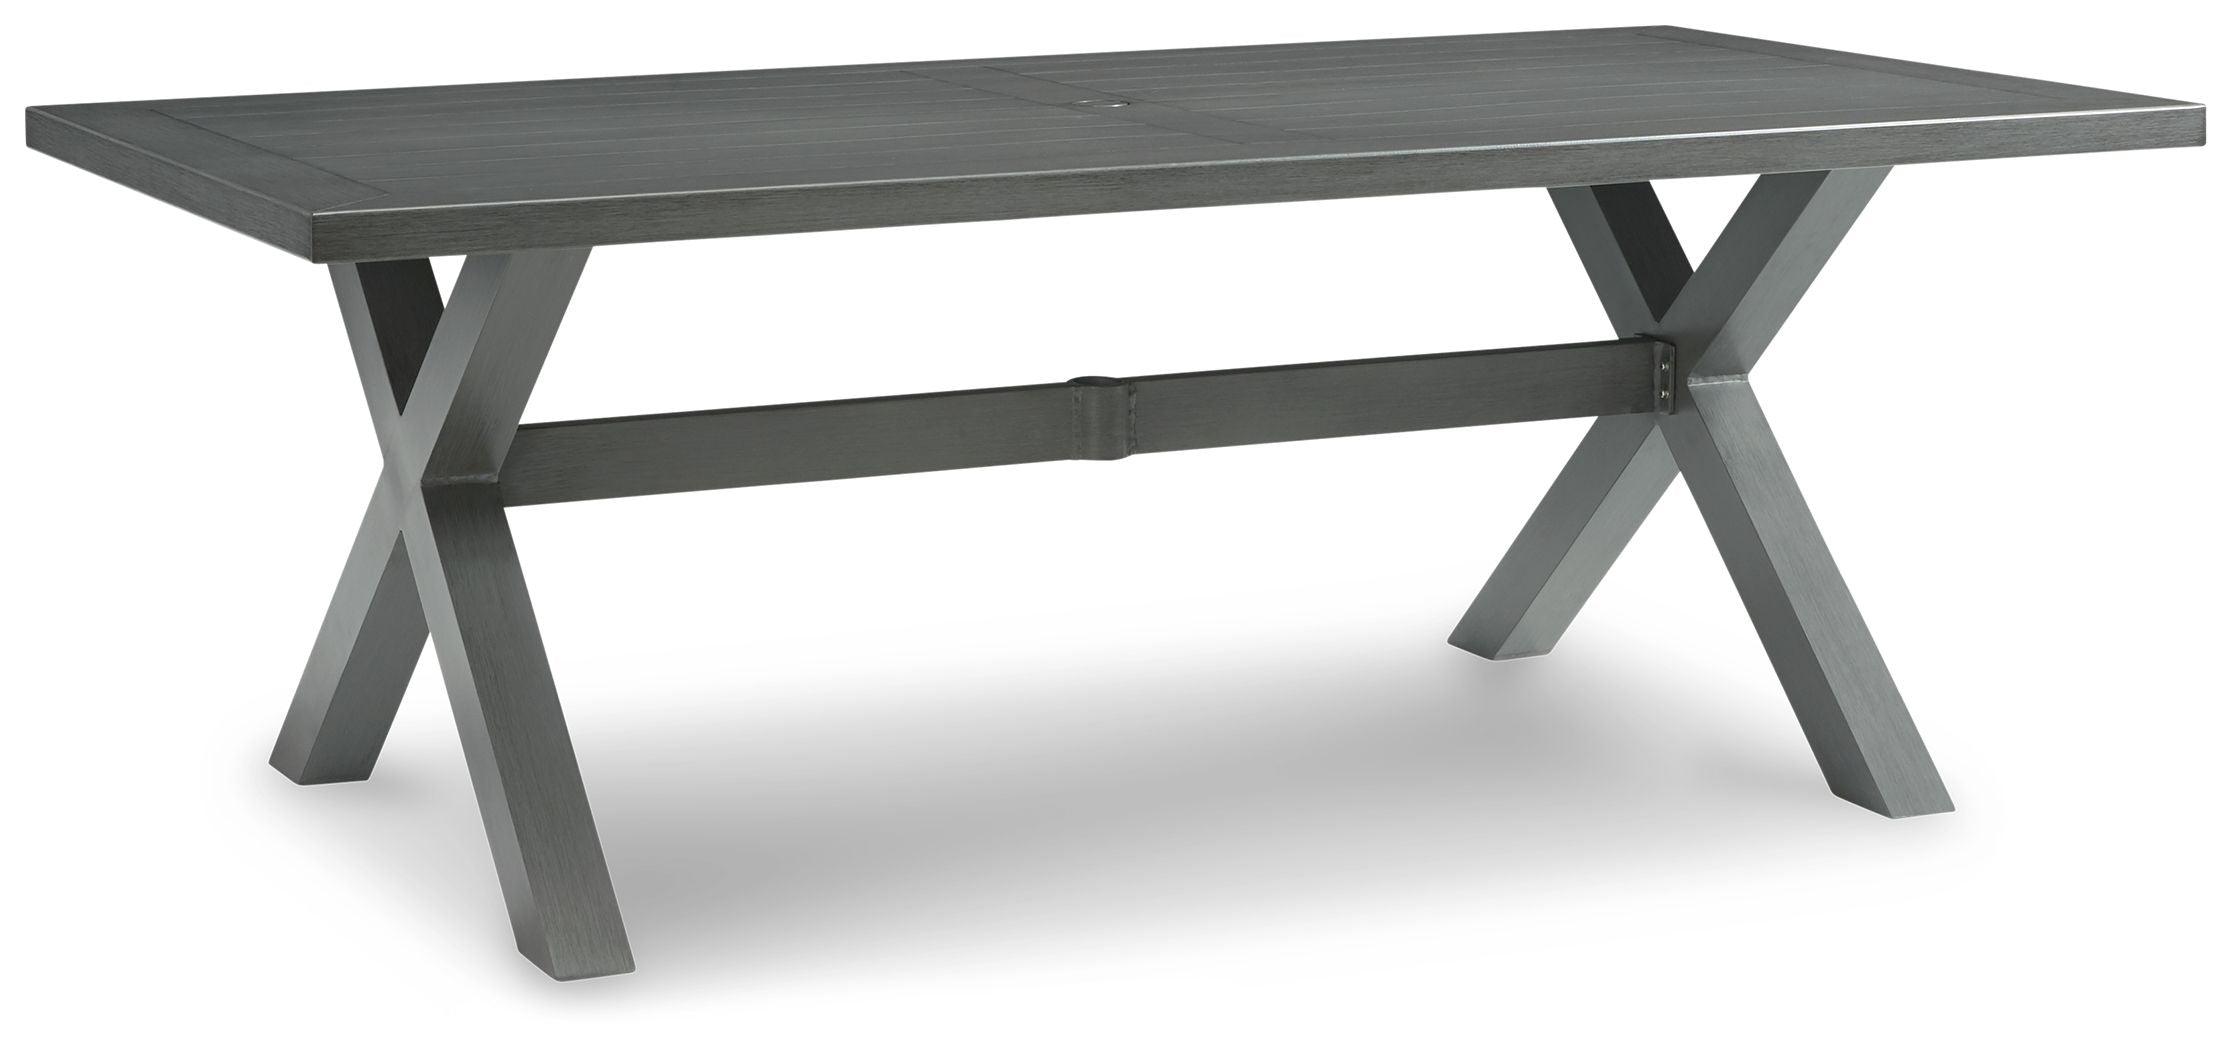 Signature Design by Ashley® - Elite Park - Gray - Rect Dining Table W/Umb Opt - 5th Avenue Furniture